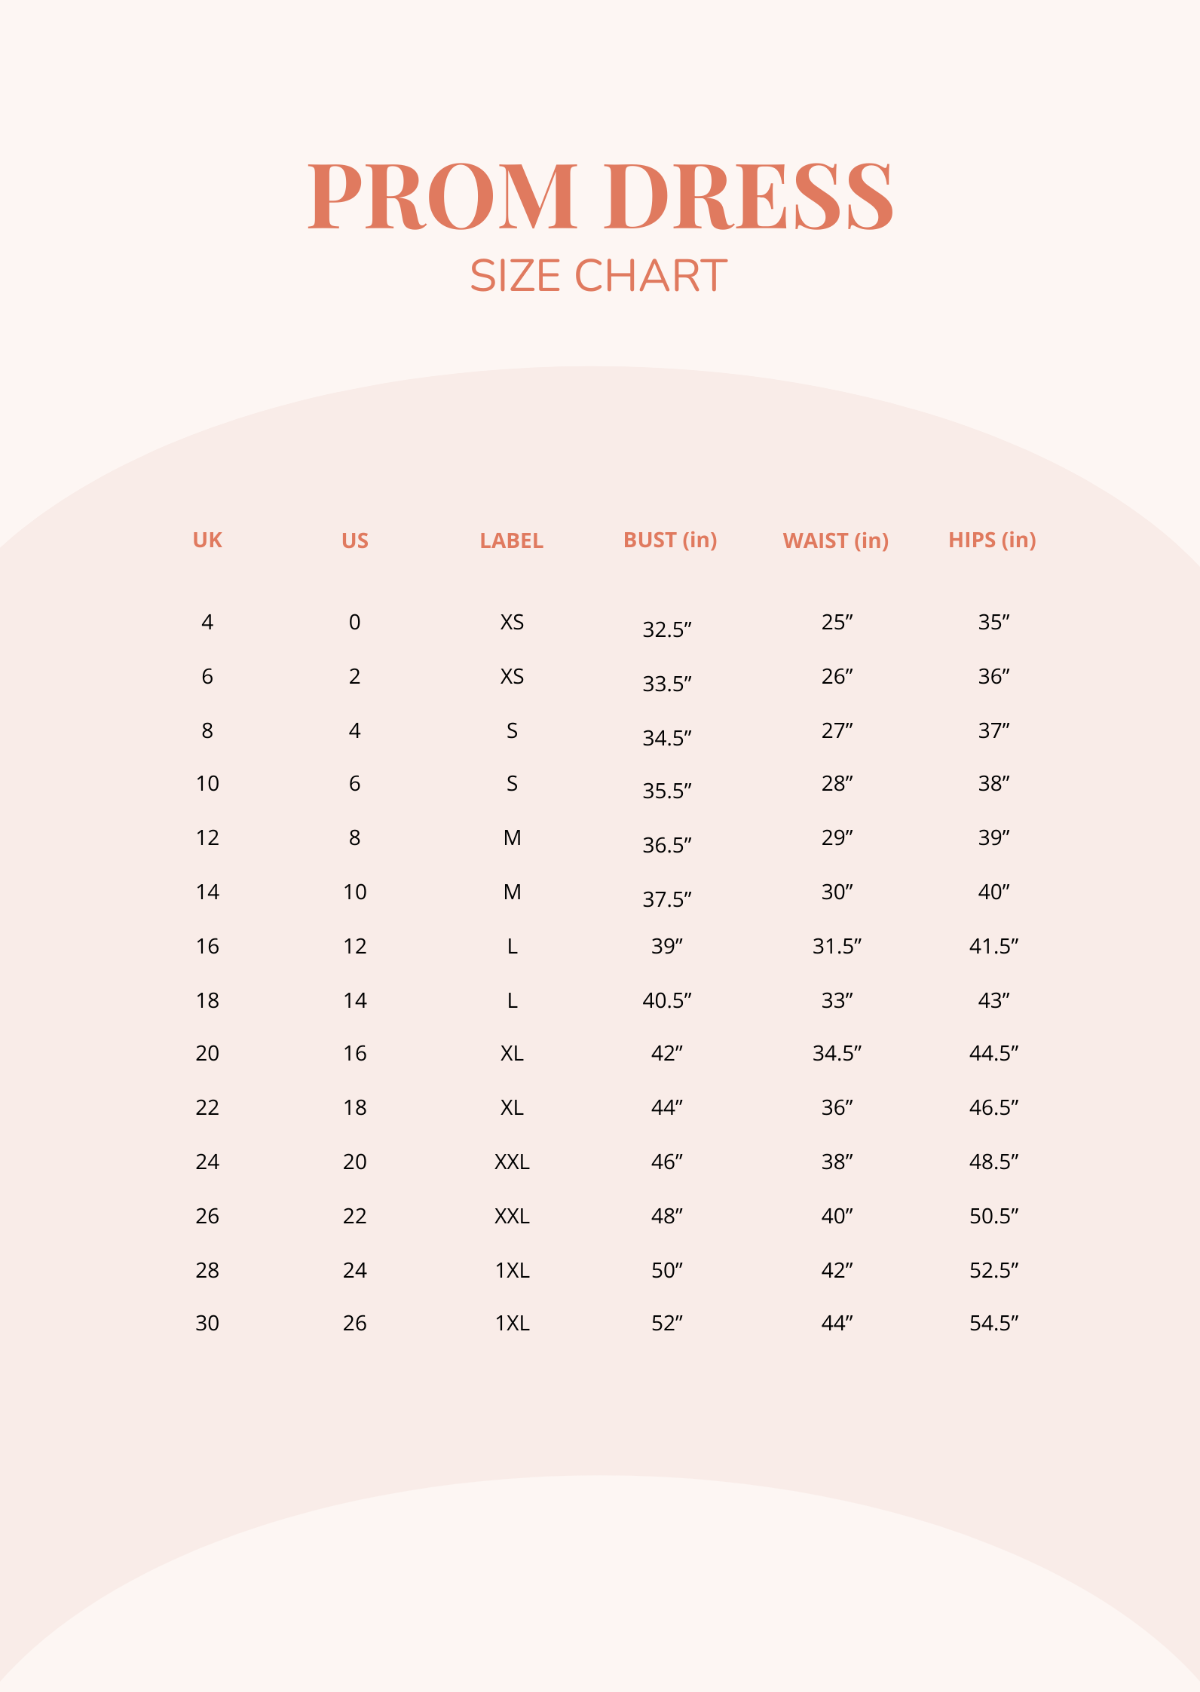 FREE Dress Size Chart Templates & Examples - Edit Online & Download ...